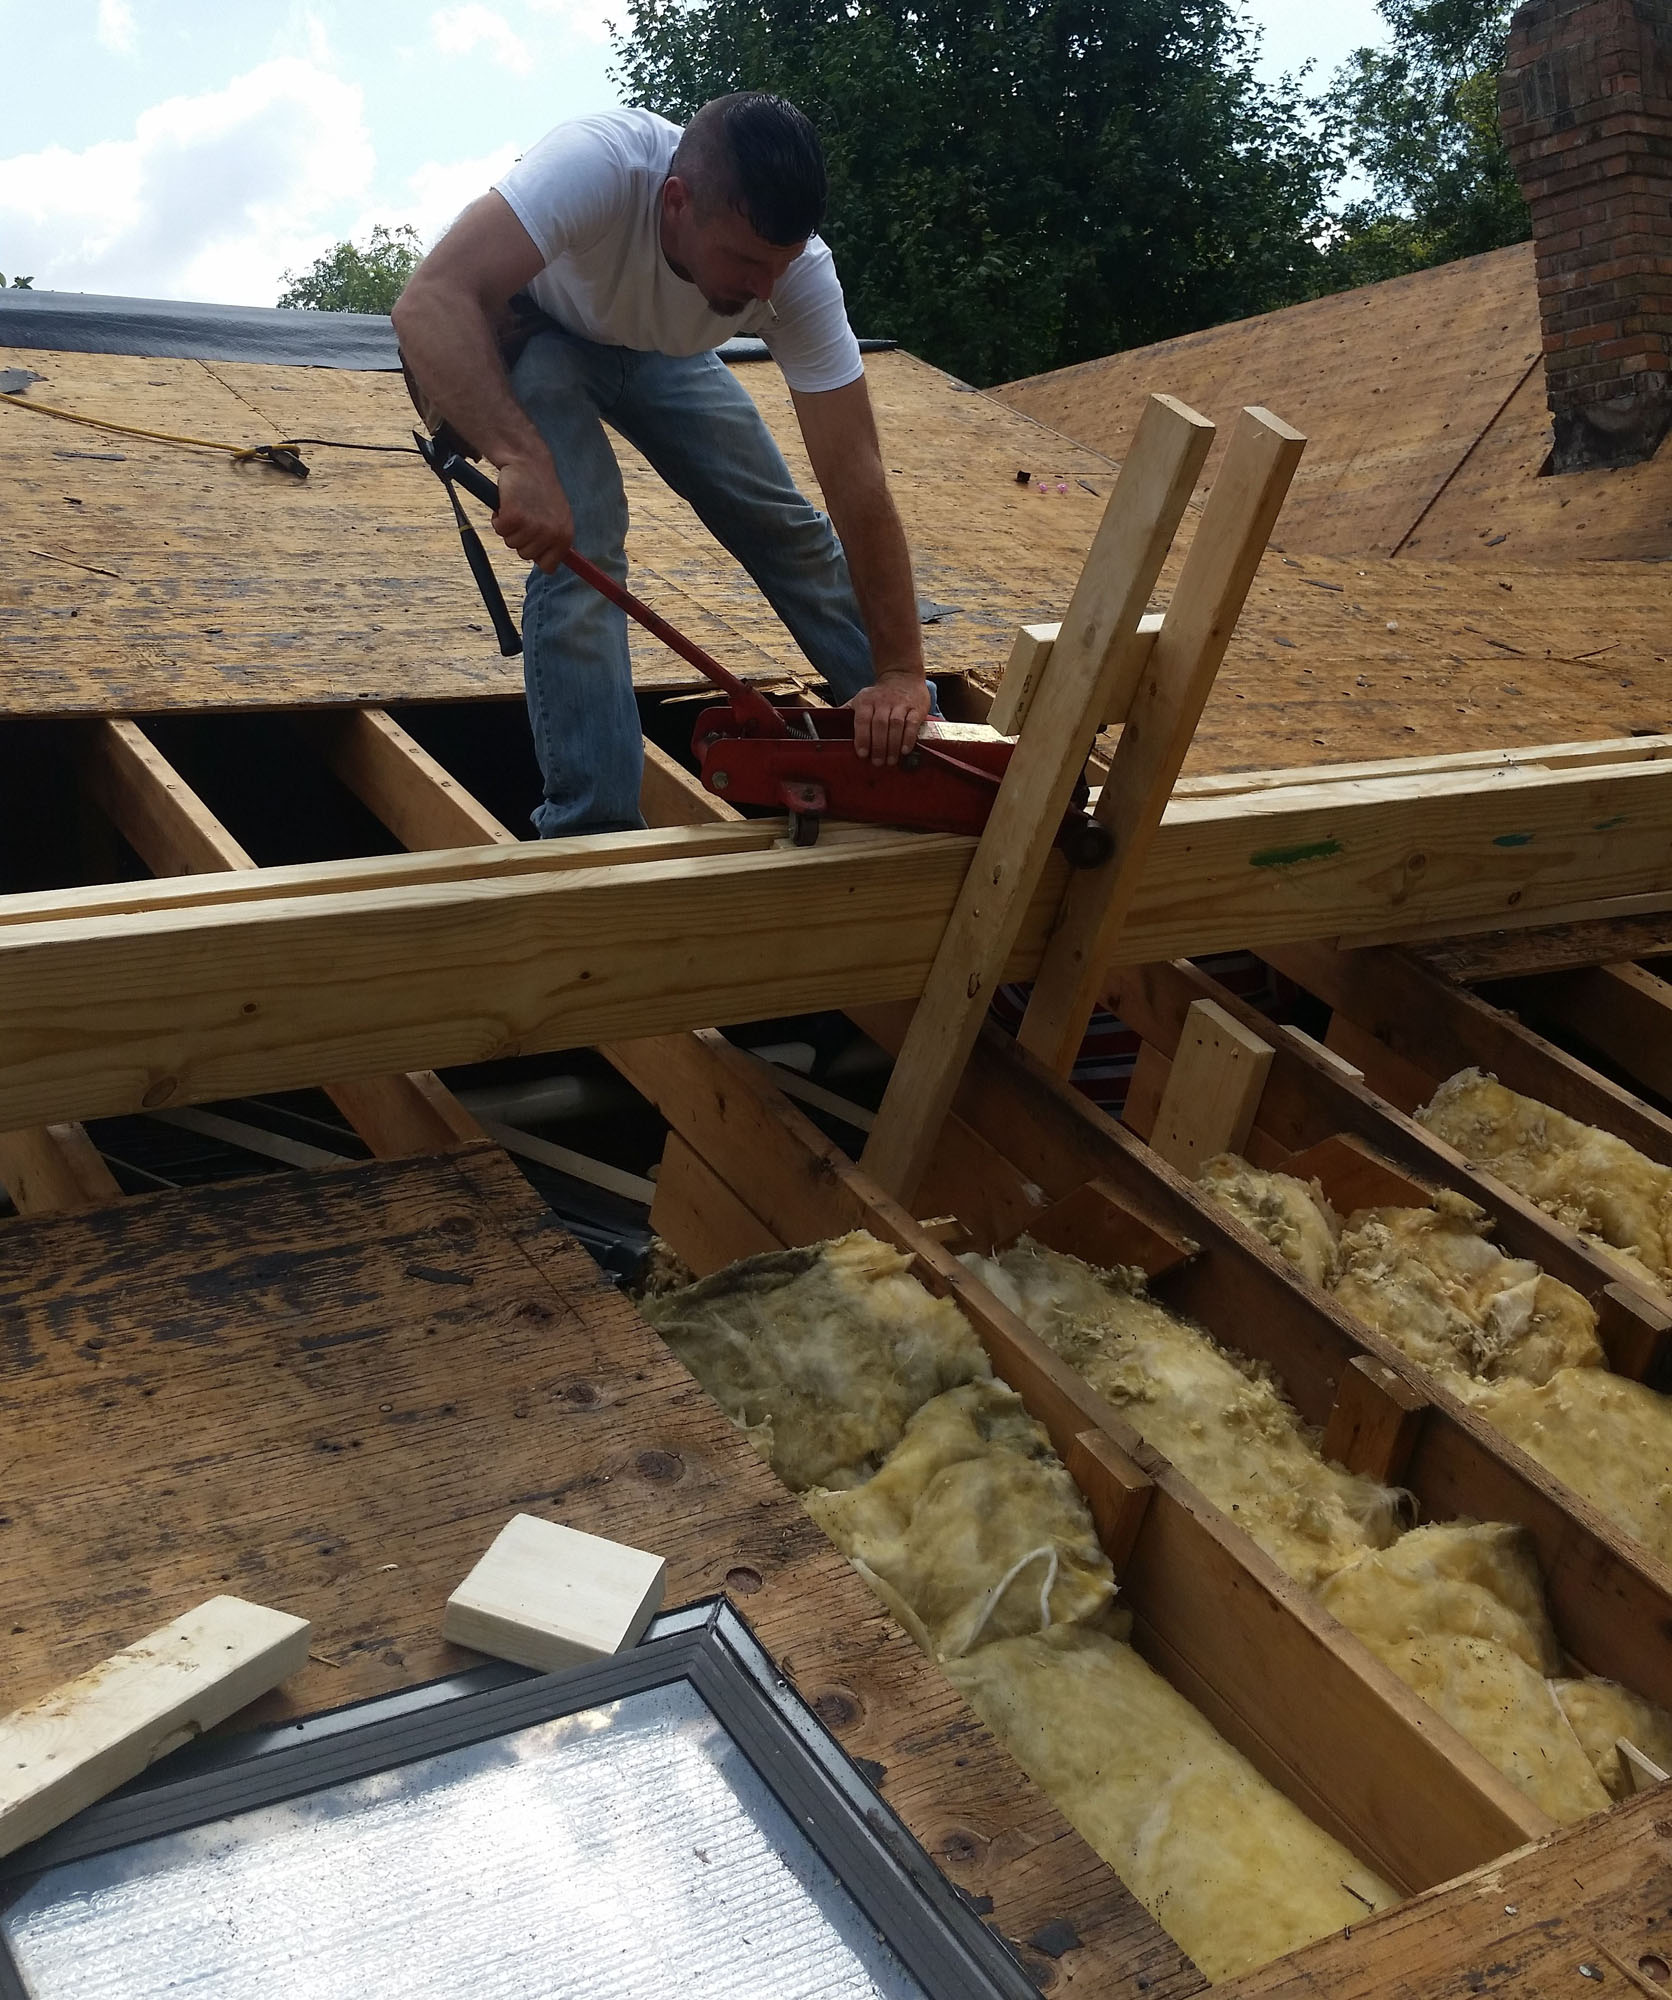 In this photo, our company founder uses a floor jack and jig to 'pull' framing into place